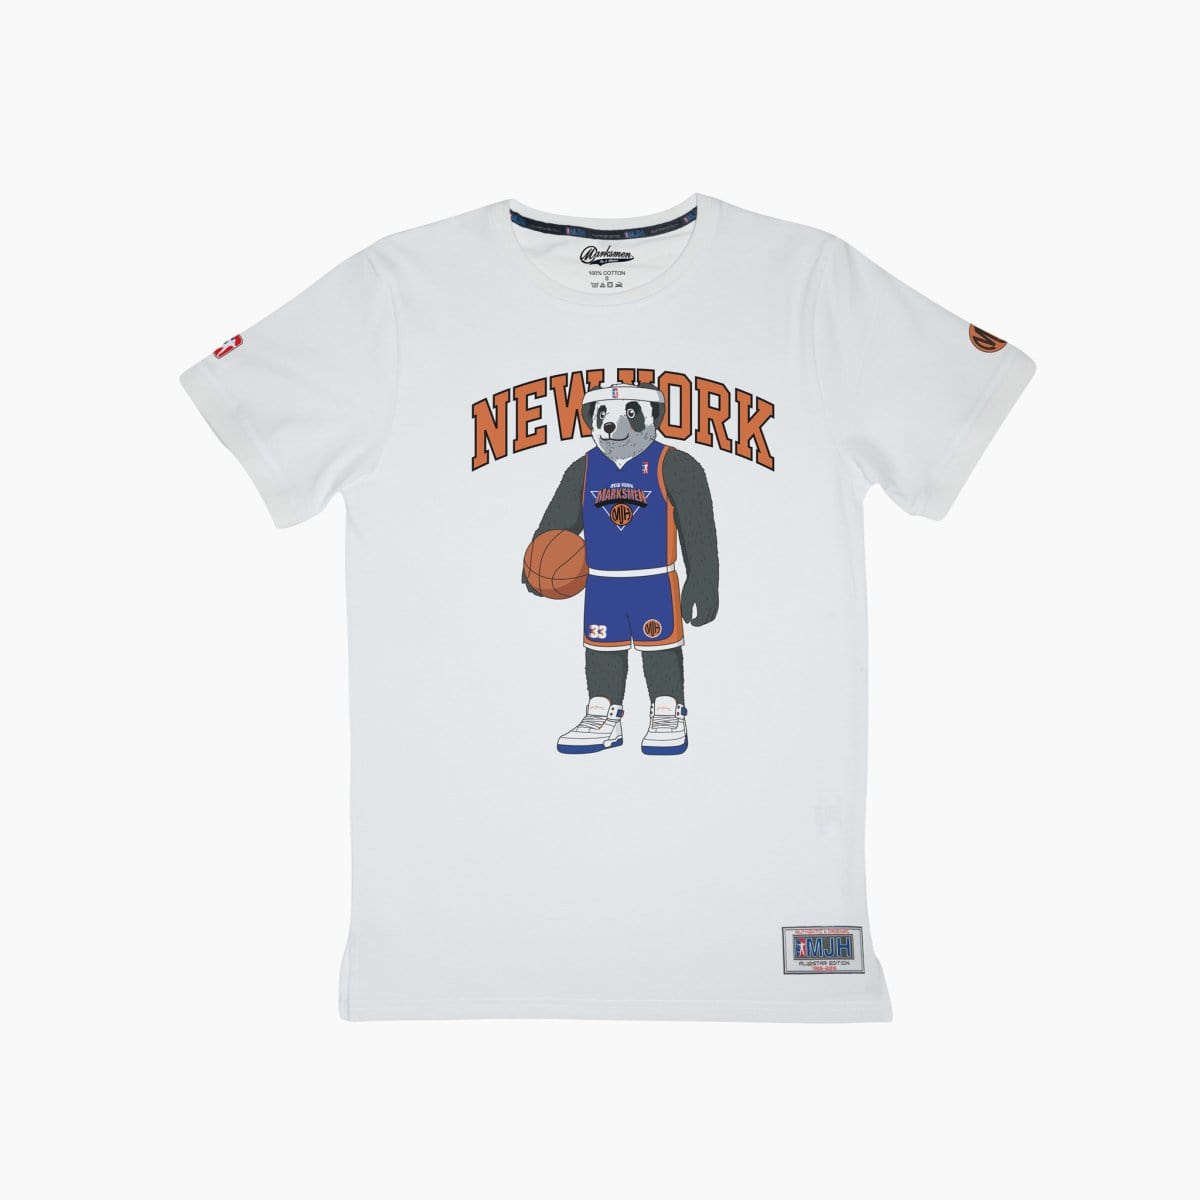 J.Hinton Collections Men's New York Ewing Inspired T-shirt